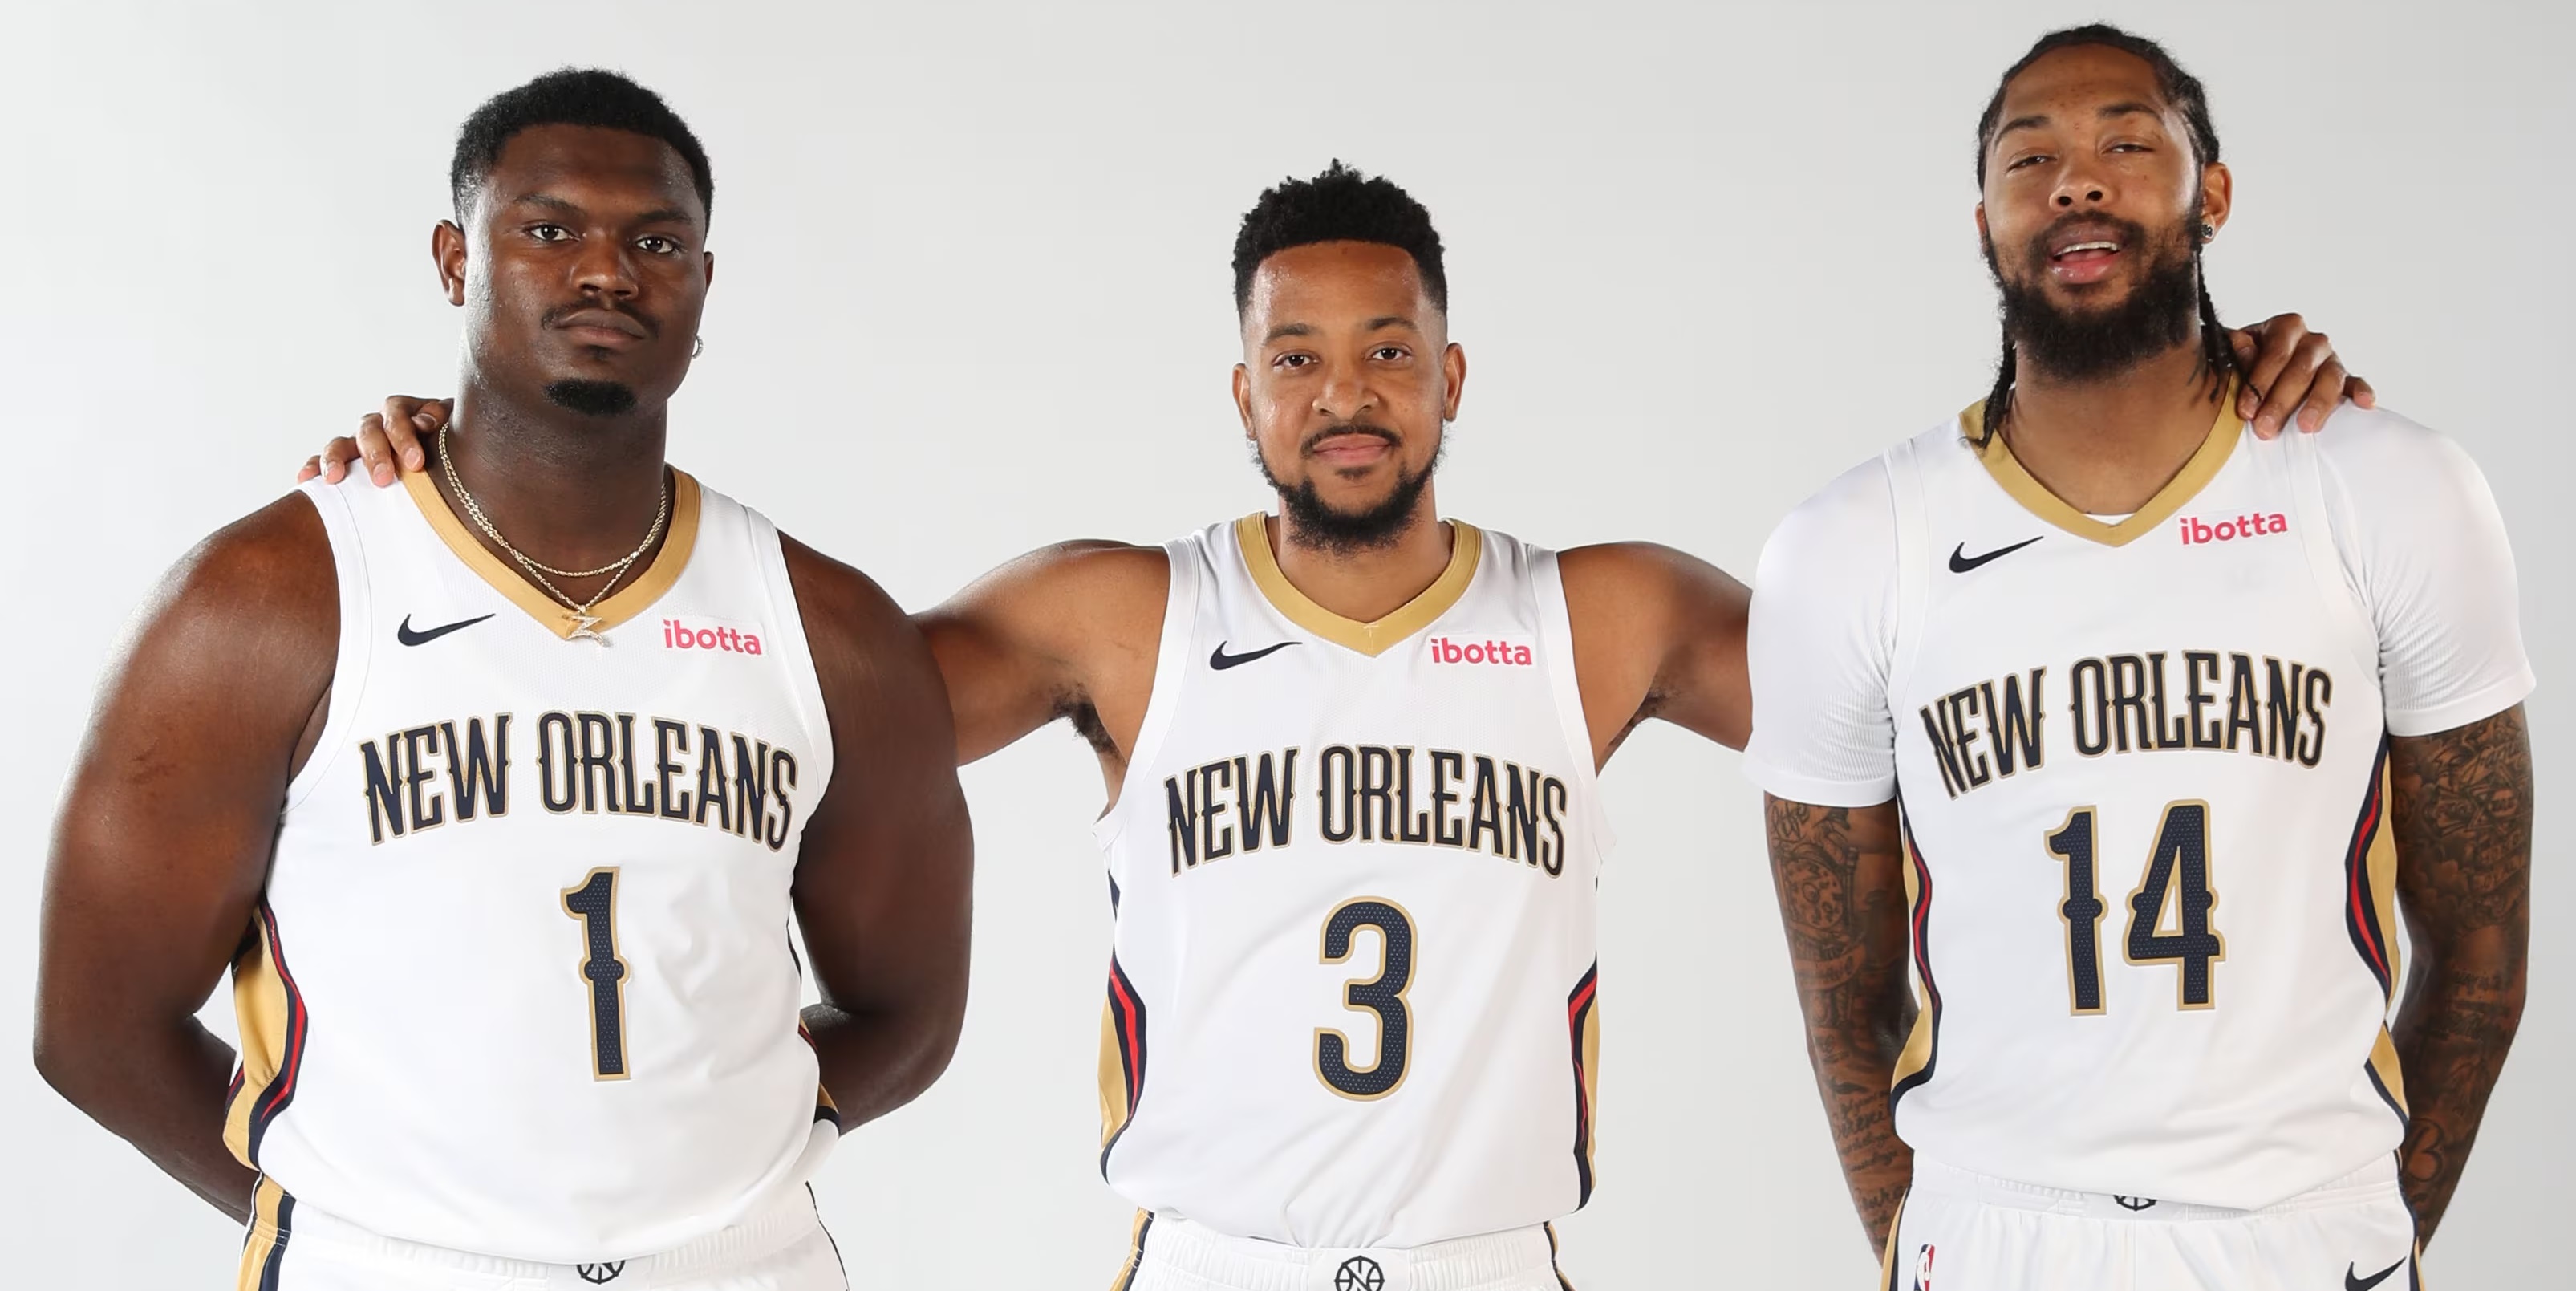 The New Orleans Pelicans' home court is kind of boring